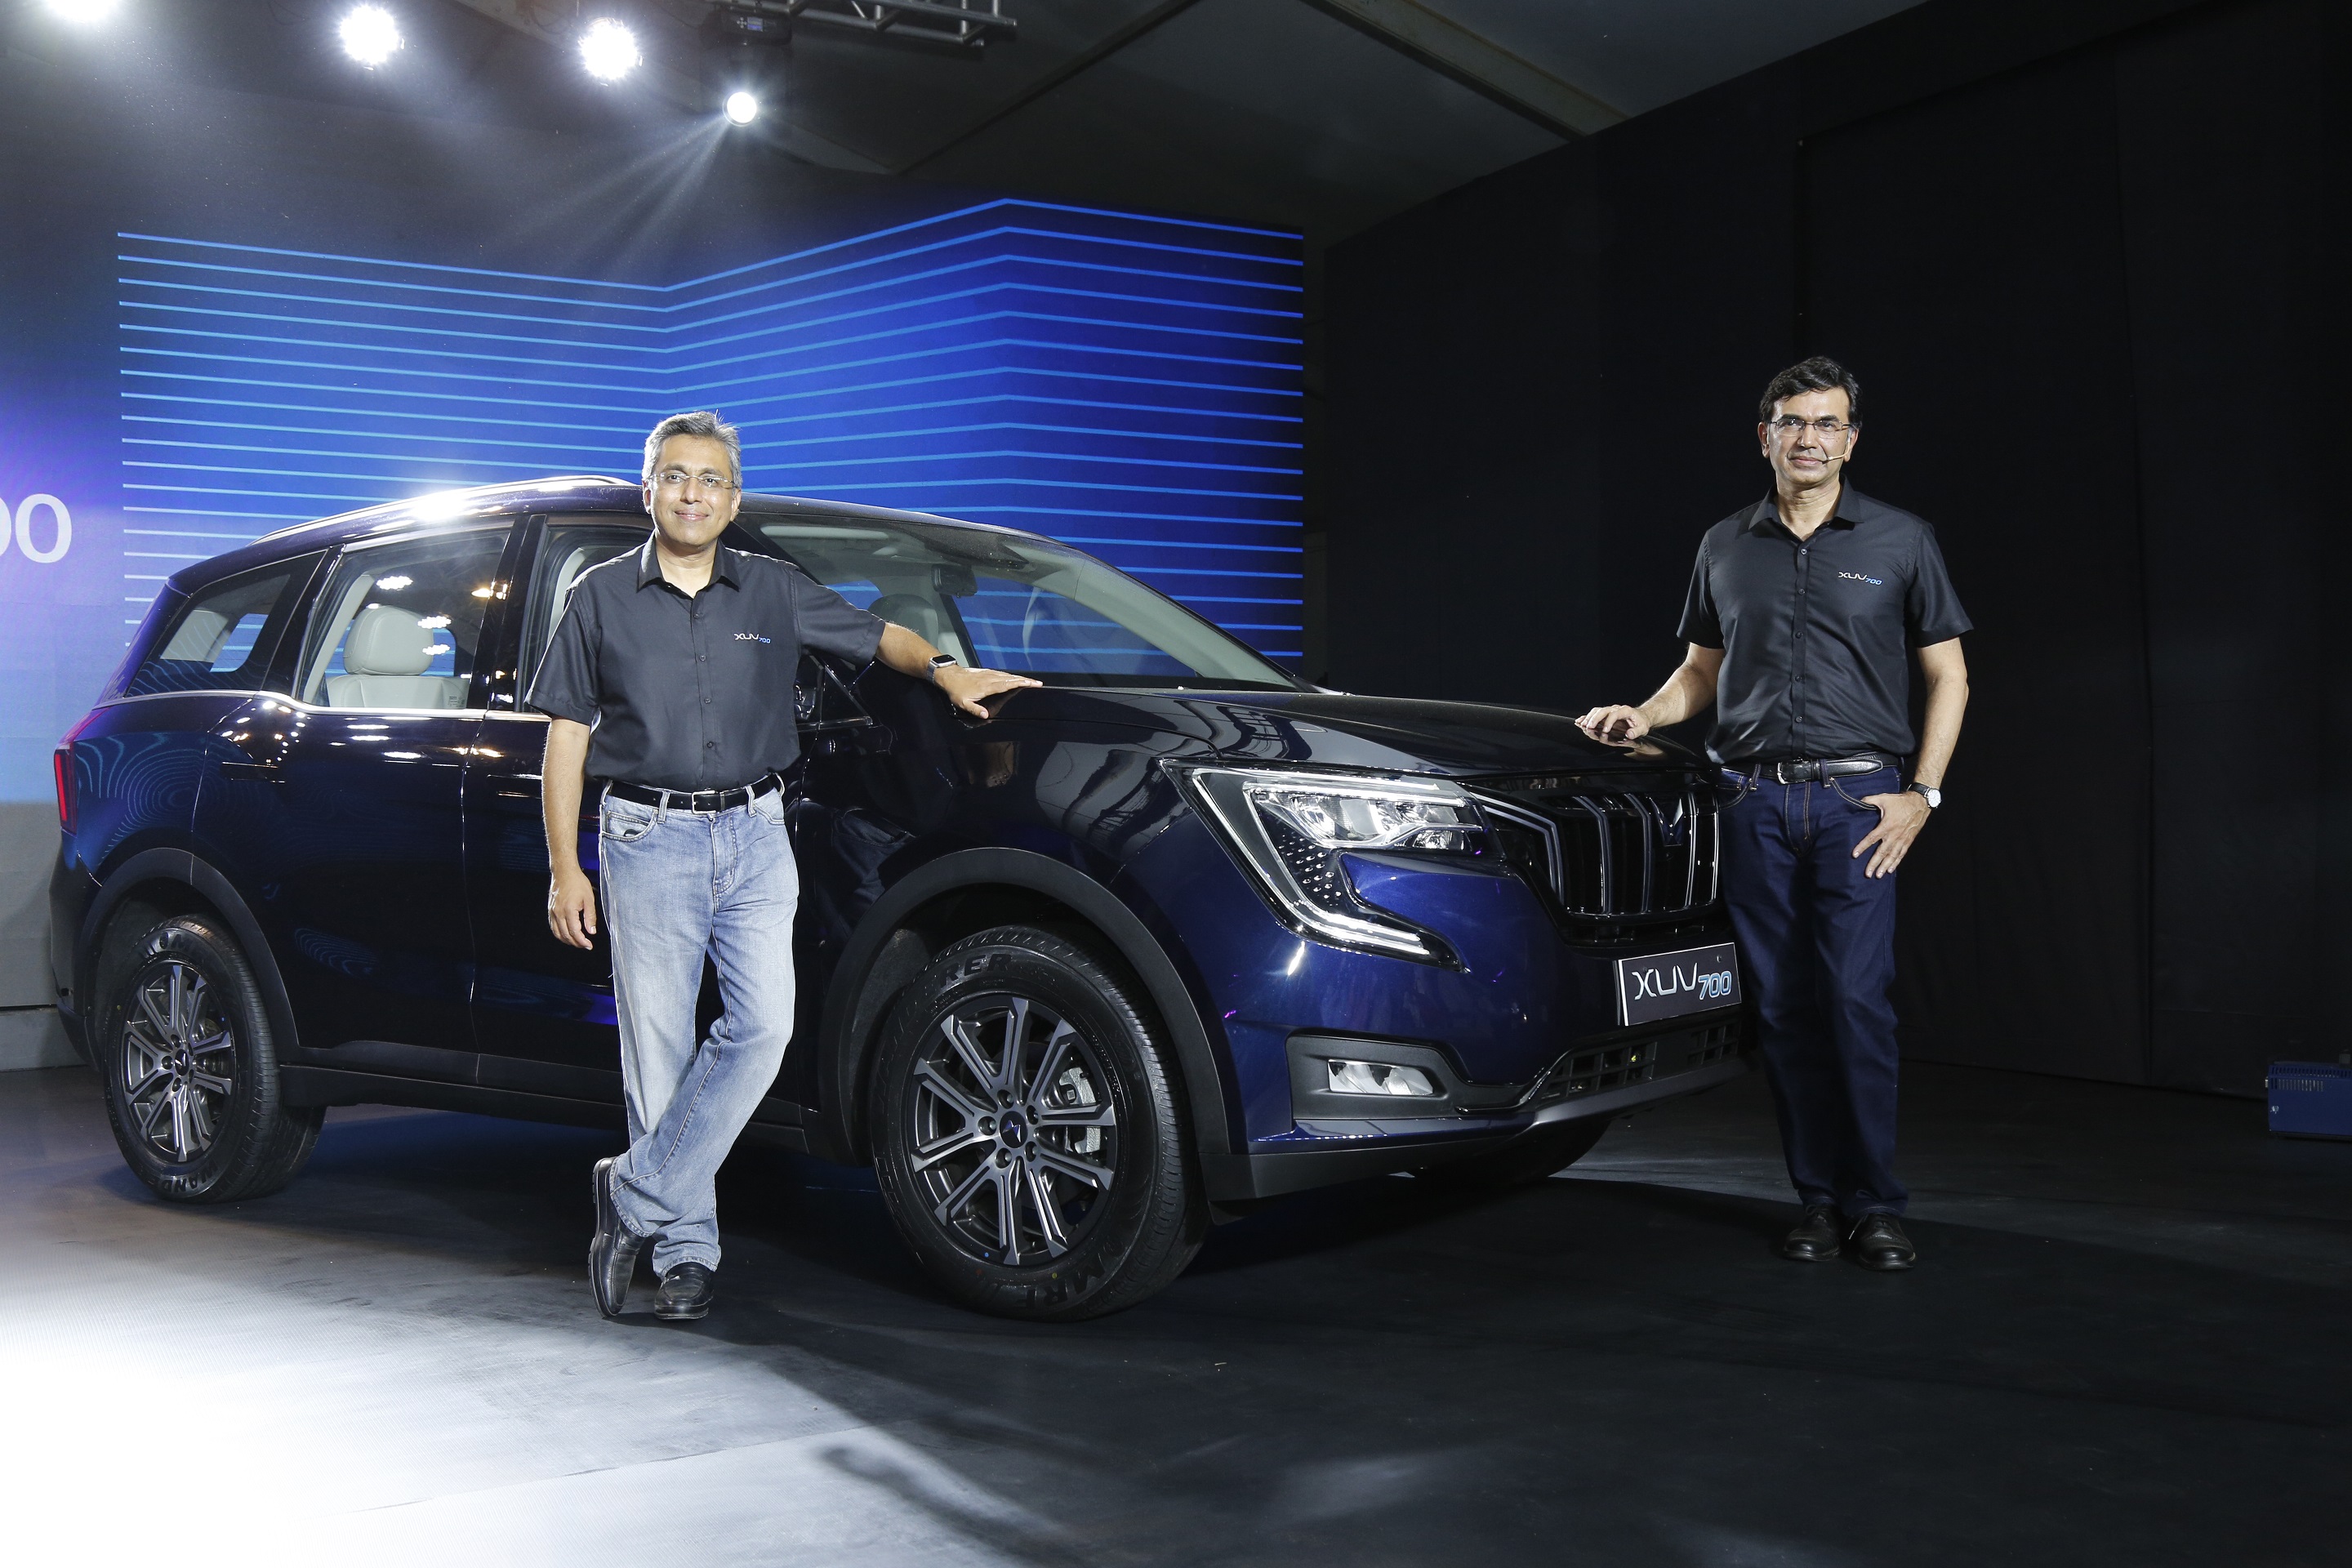 mahindra-launches-itsall-new-global-suv-the-xuv700-starting-frome282b9-11-99-lakh